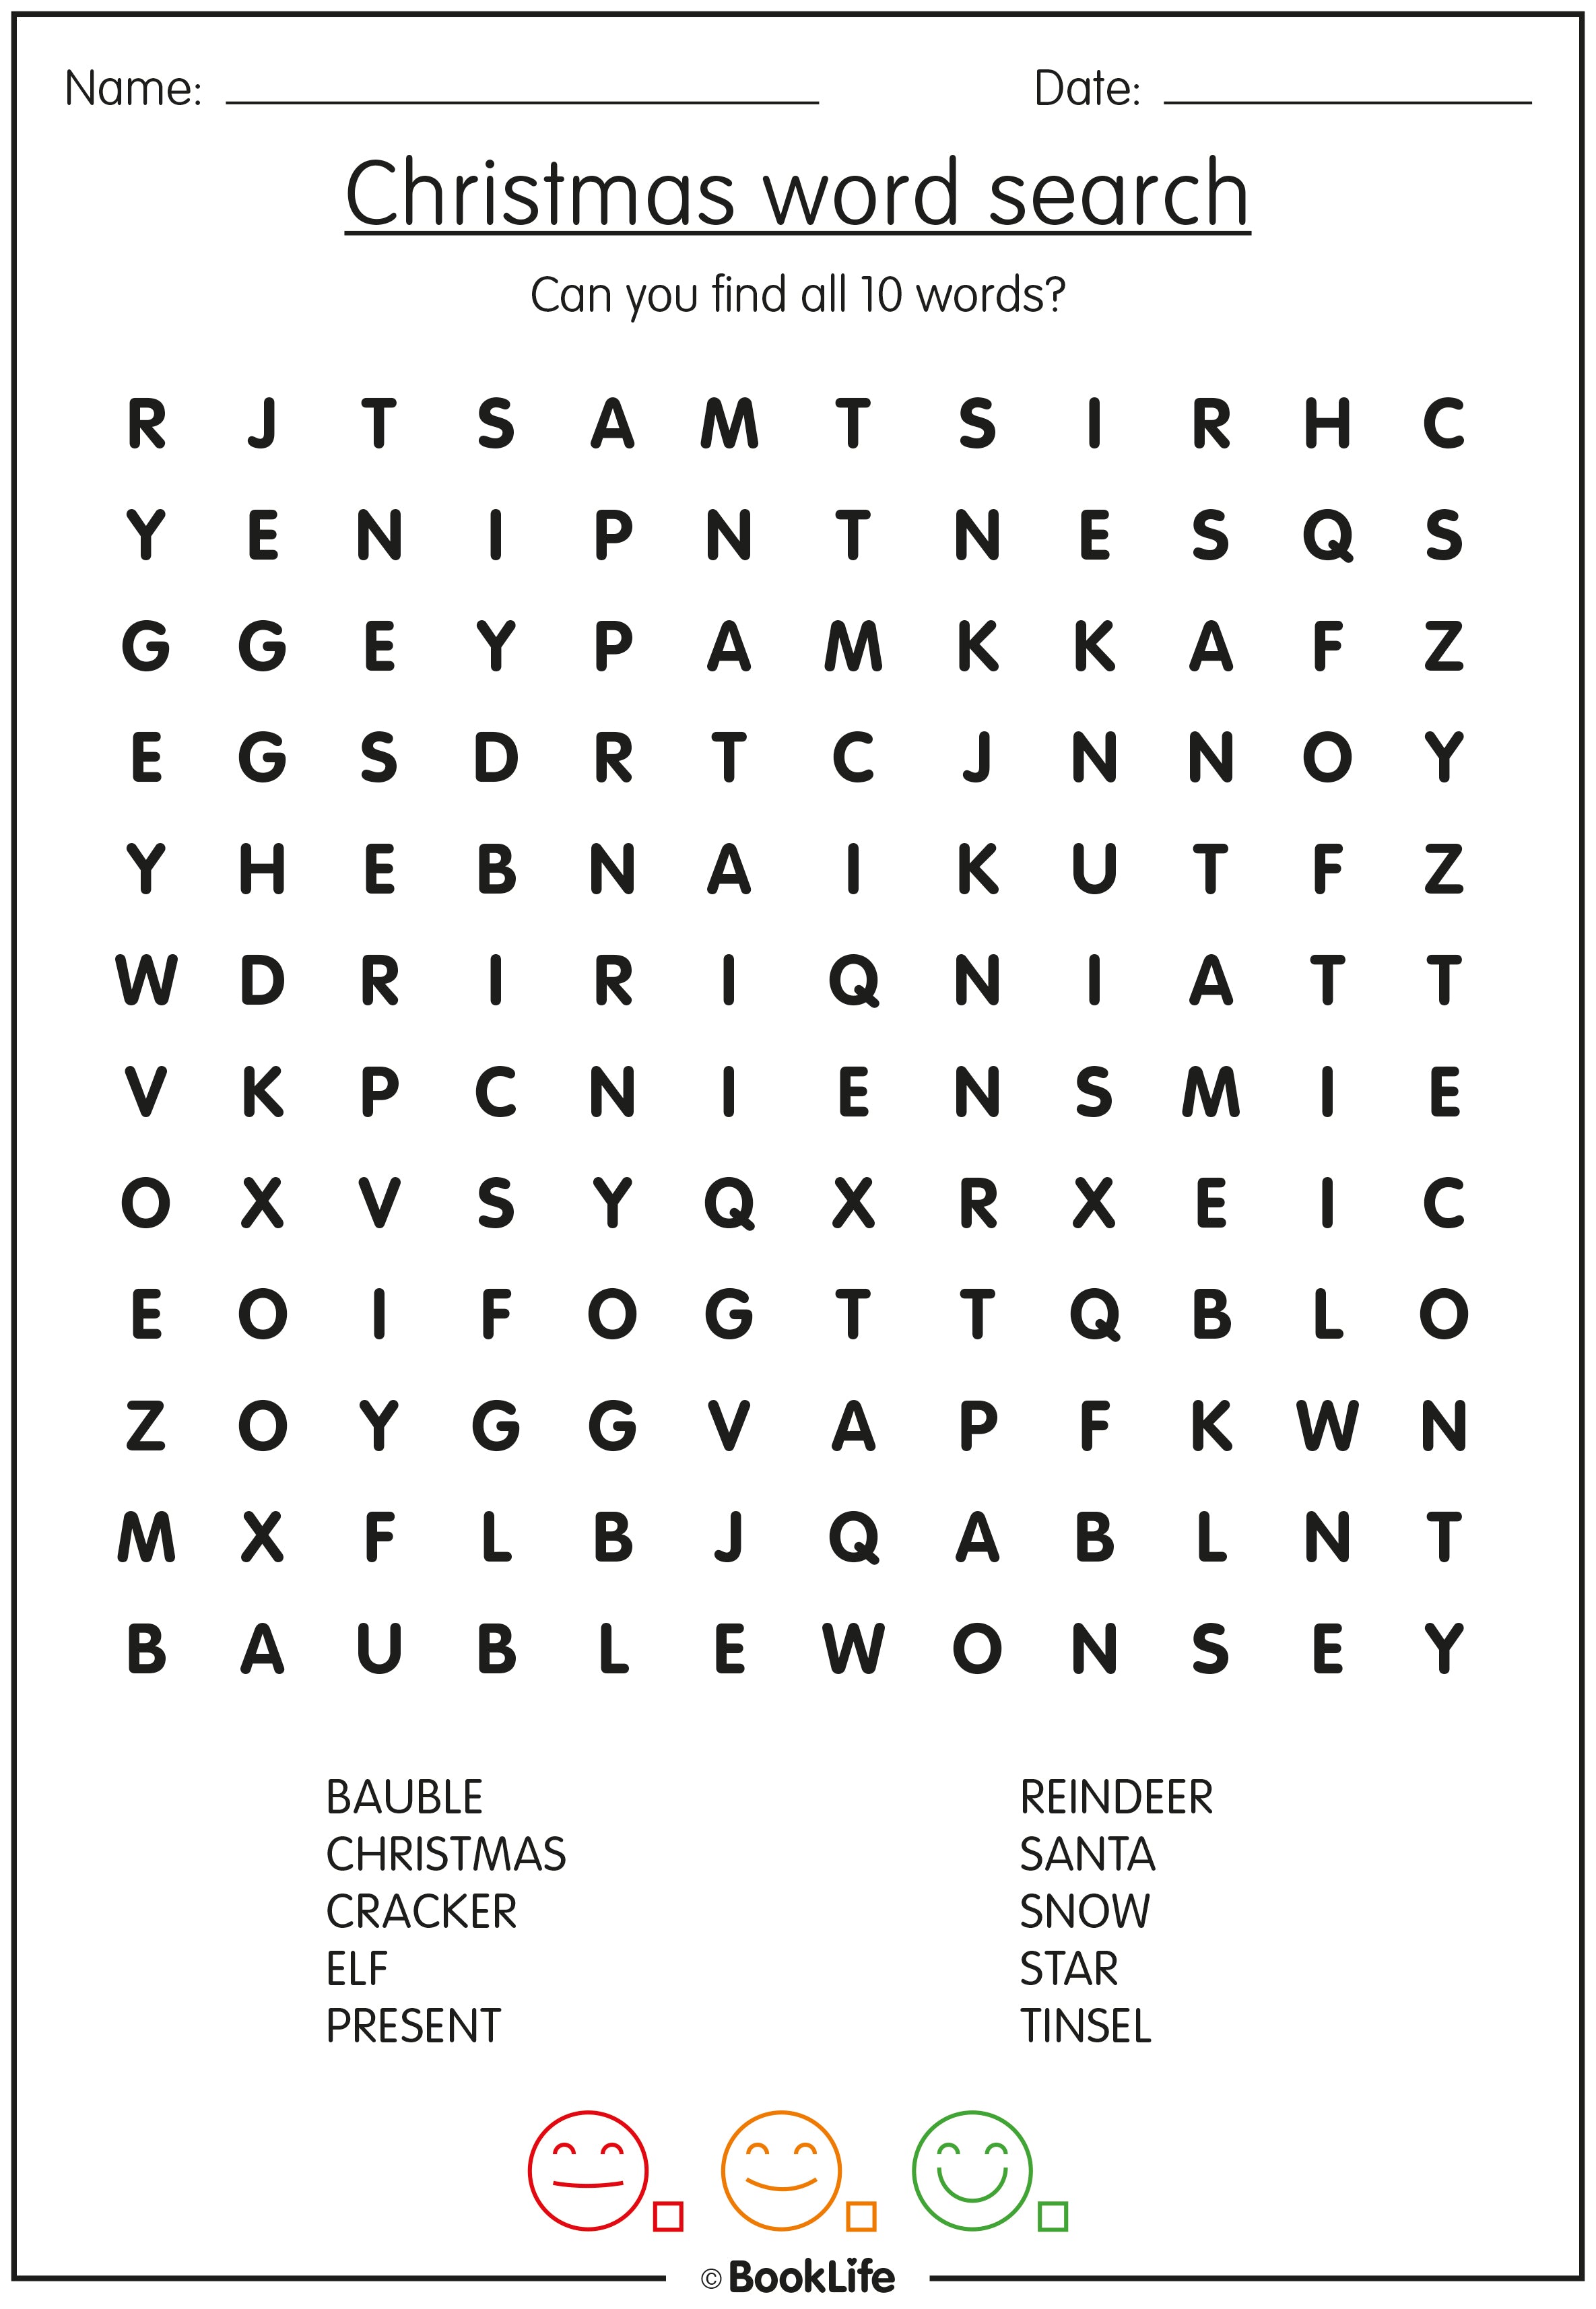 Christmas Wordsearch Activity Sheet by BookLife